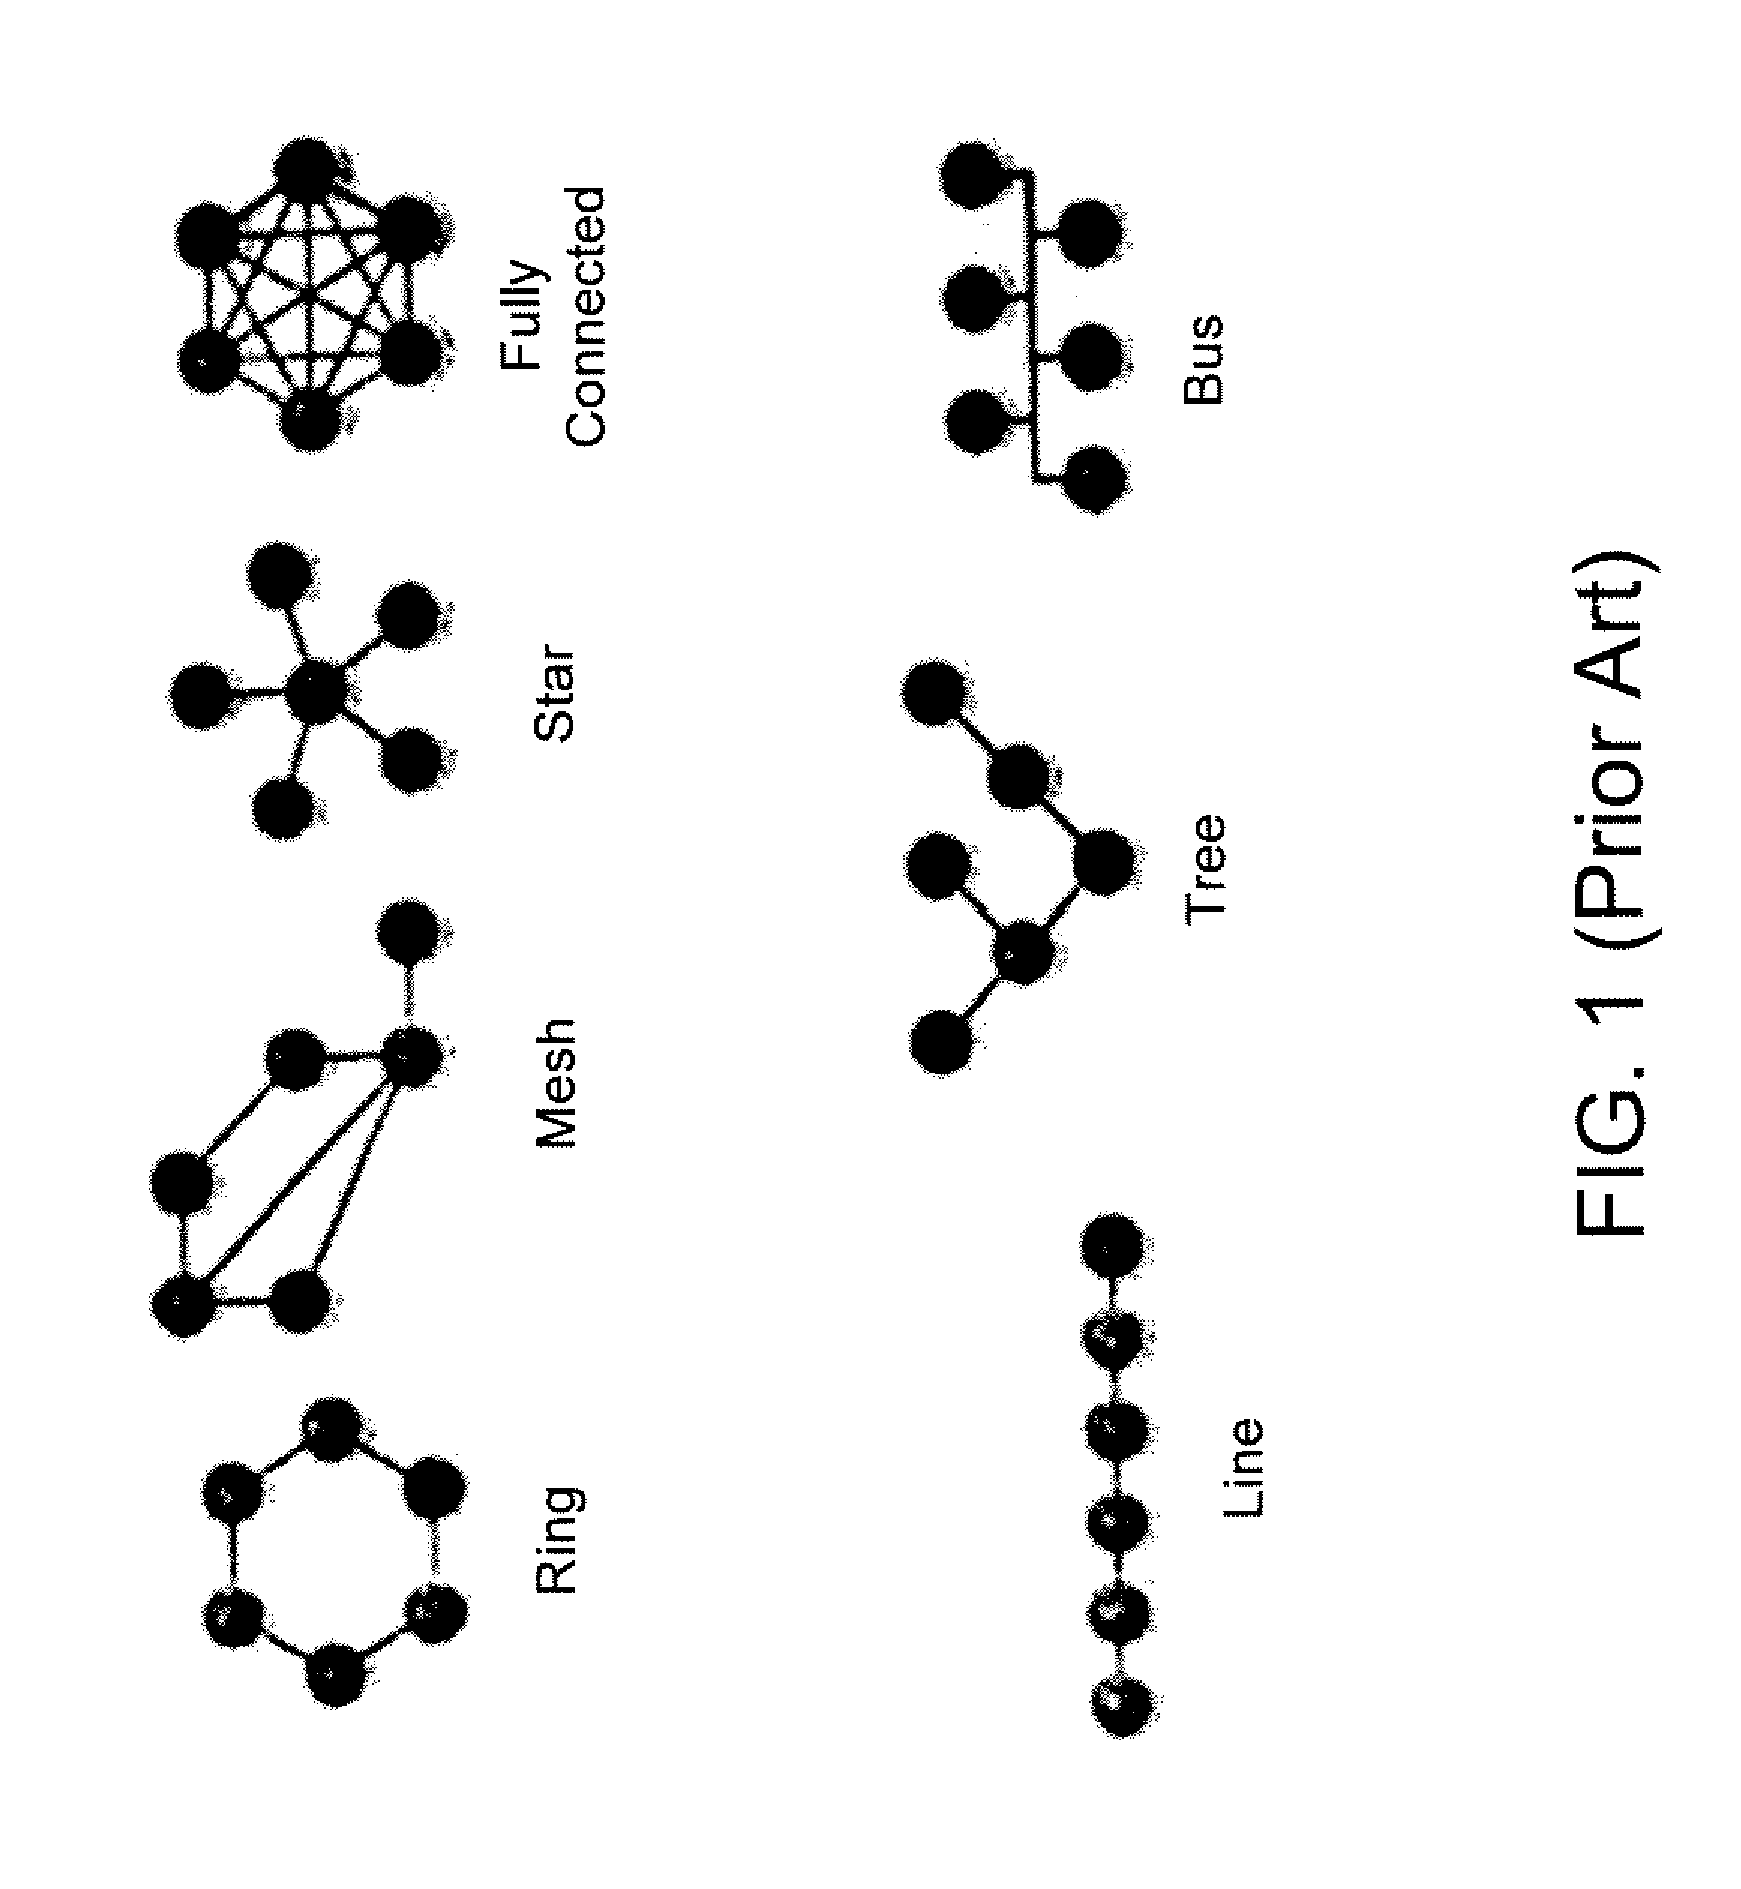 Systems and methods for improving the ability of a power delivery system to withstand multiple failure events